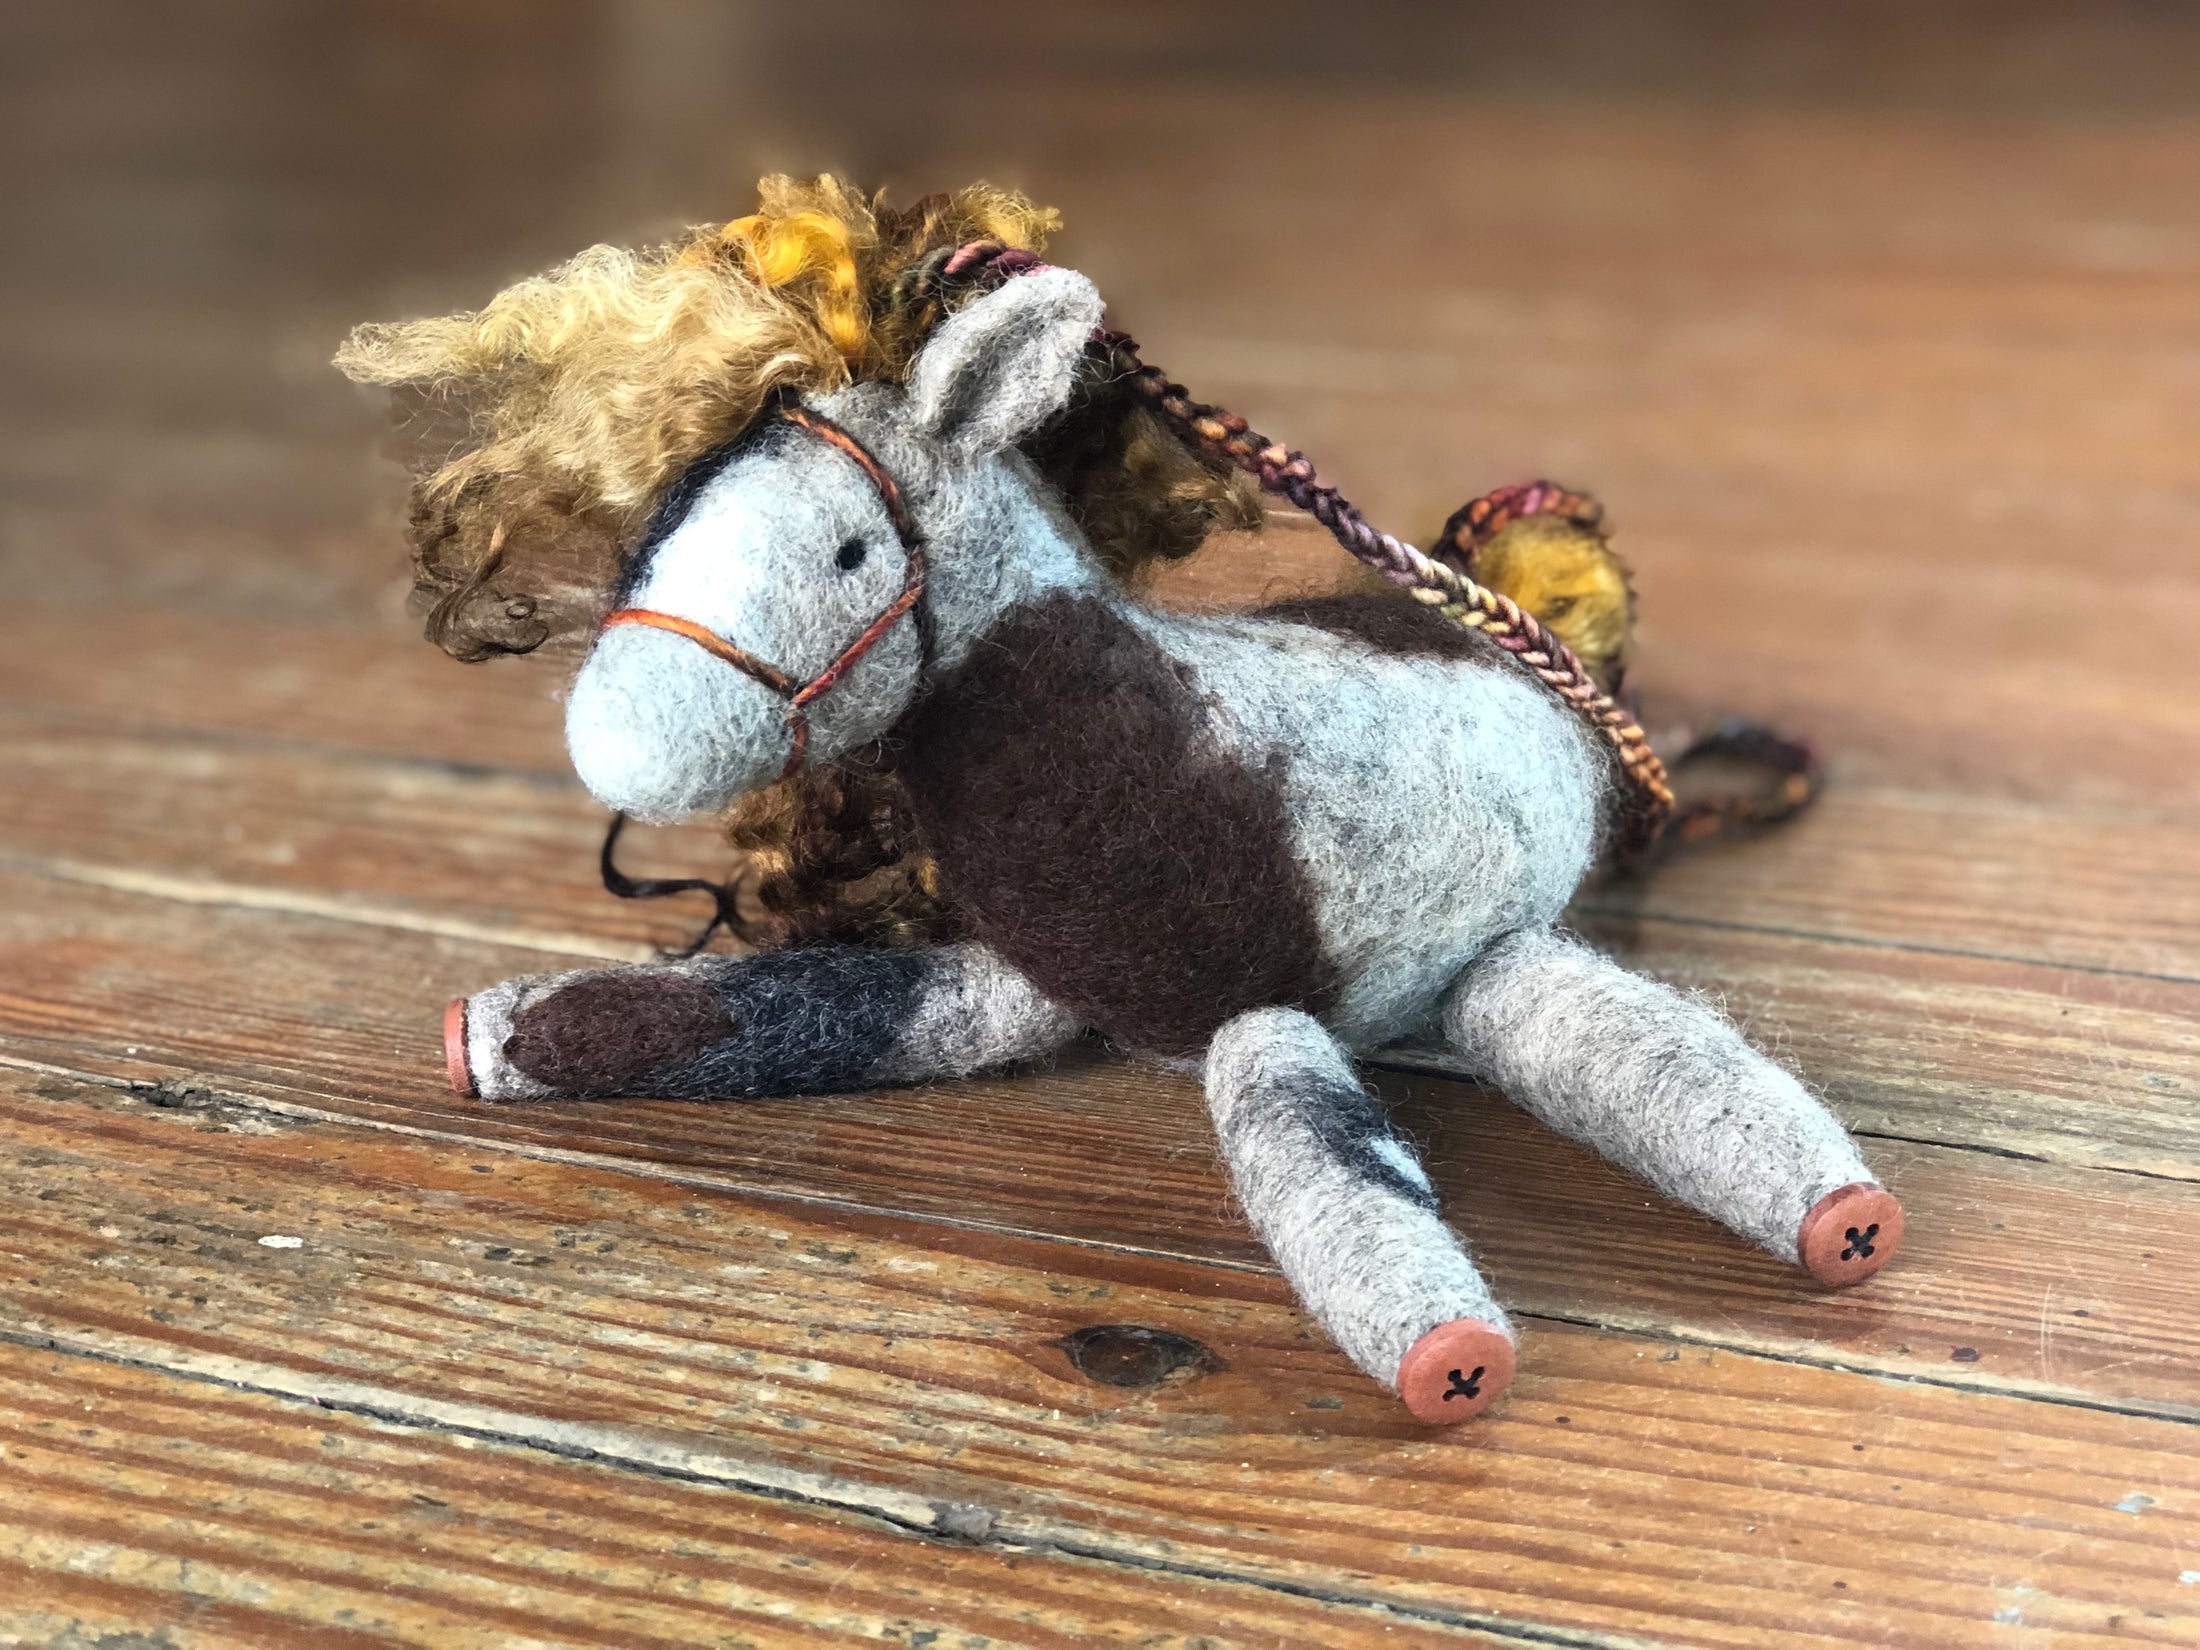 Tilly - the horse marionette